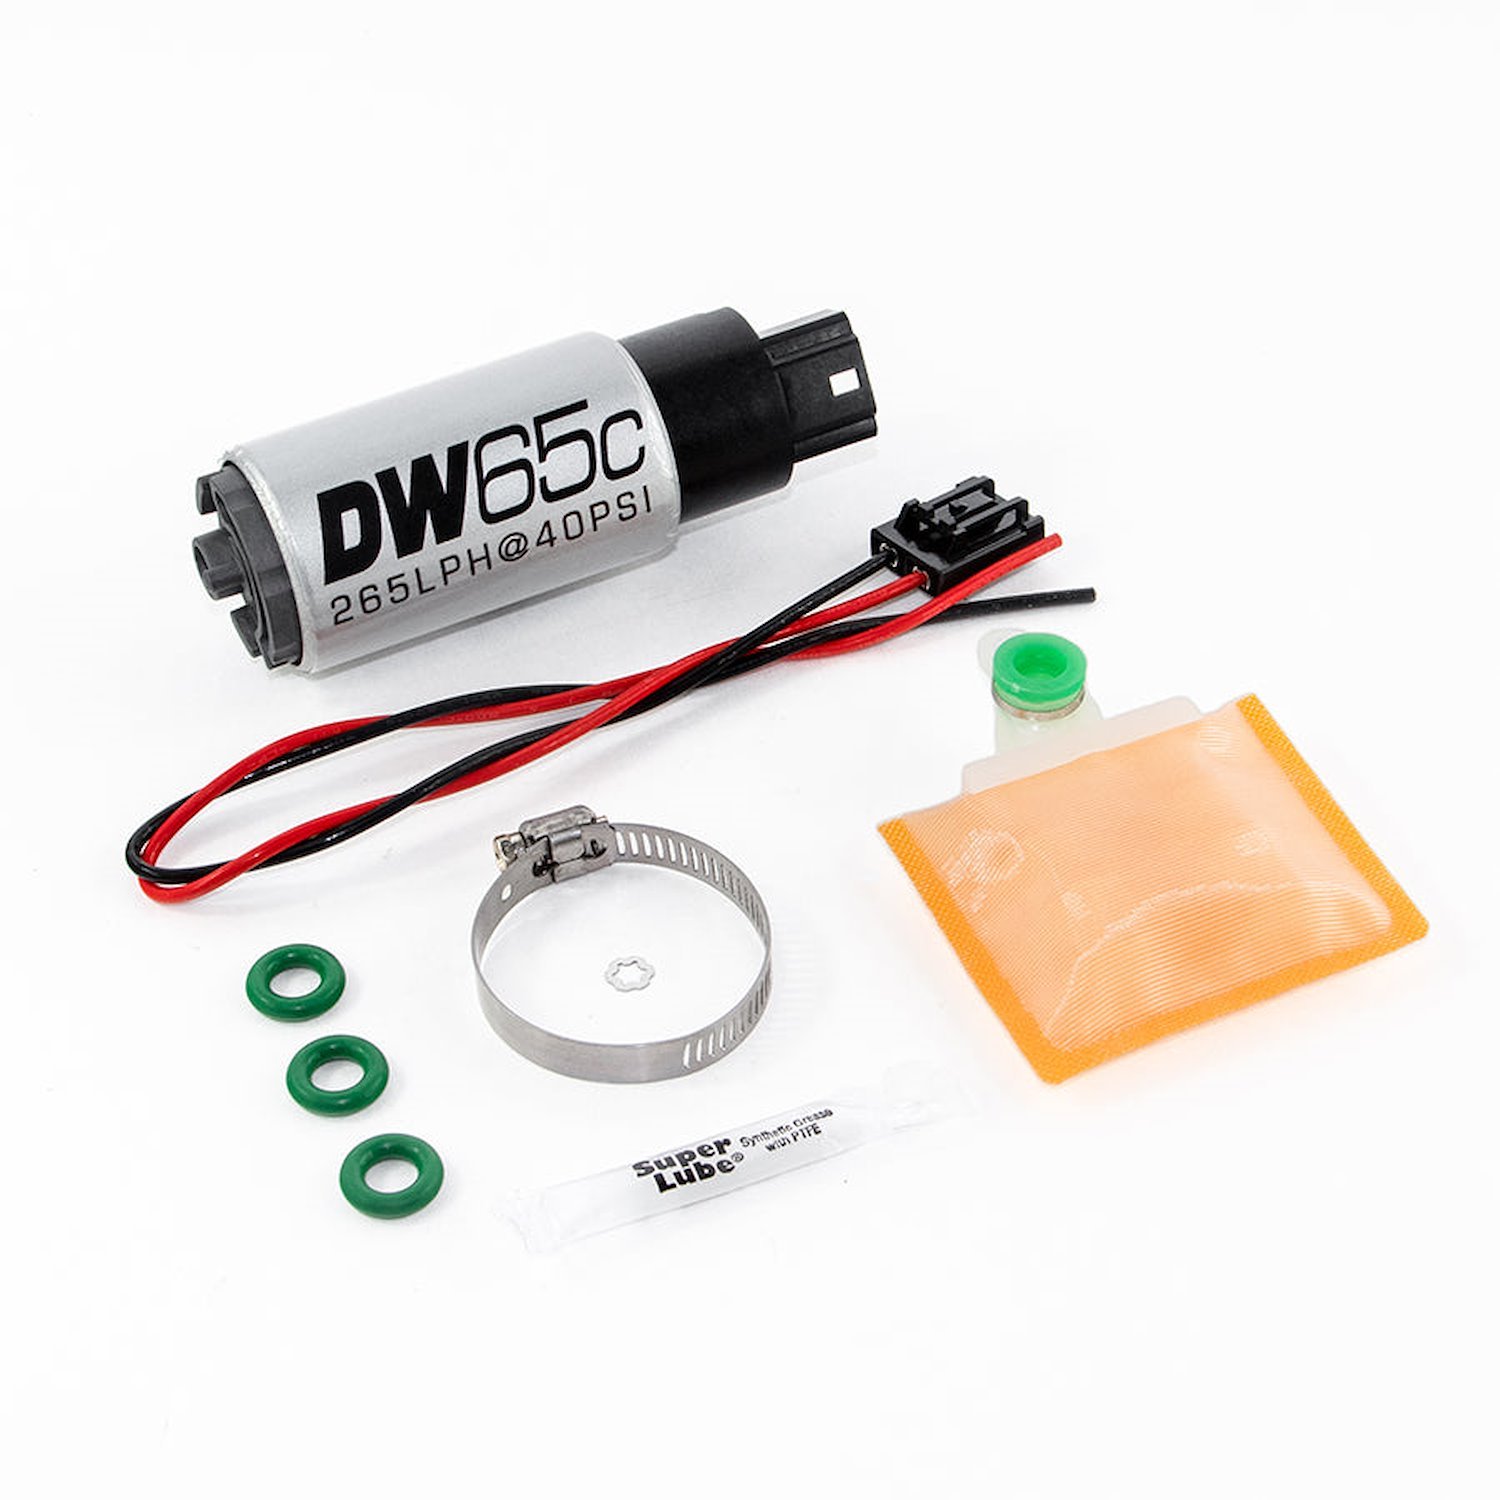 96511017 DW65C series 265lph compact fuel pump (in-tank) without mounting clips w/ install kit for Ford Focus MK2 RS